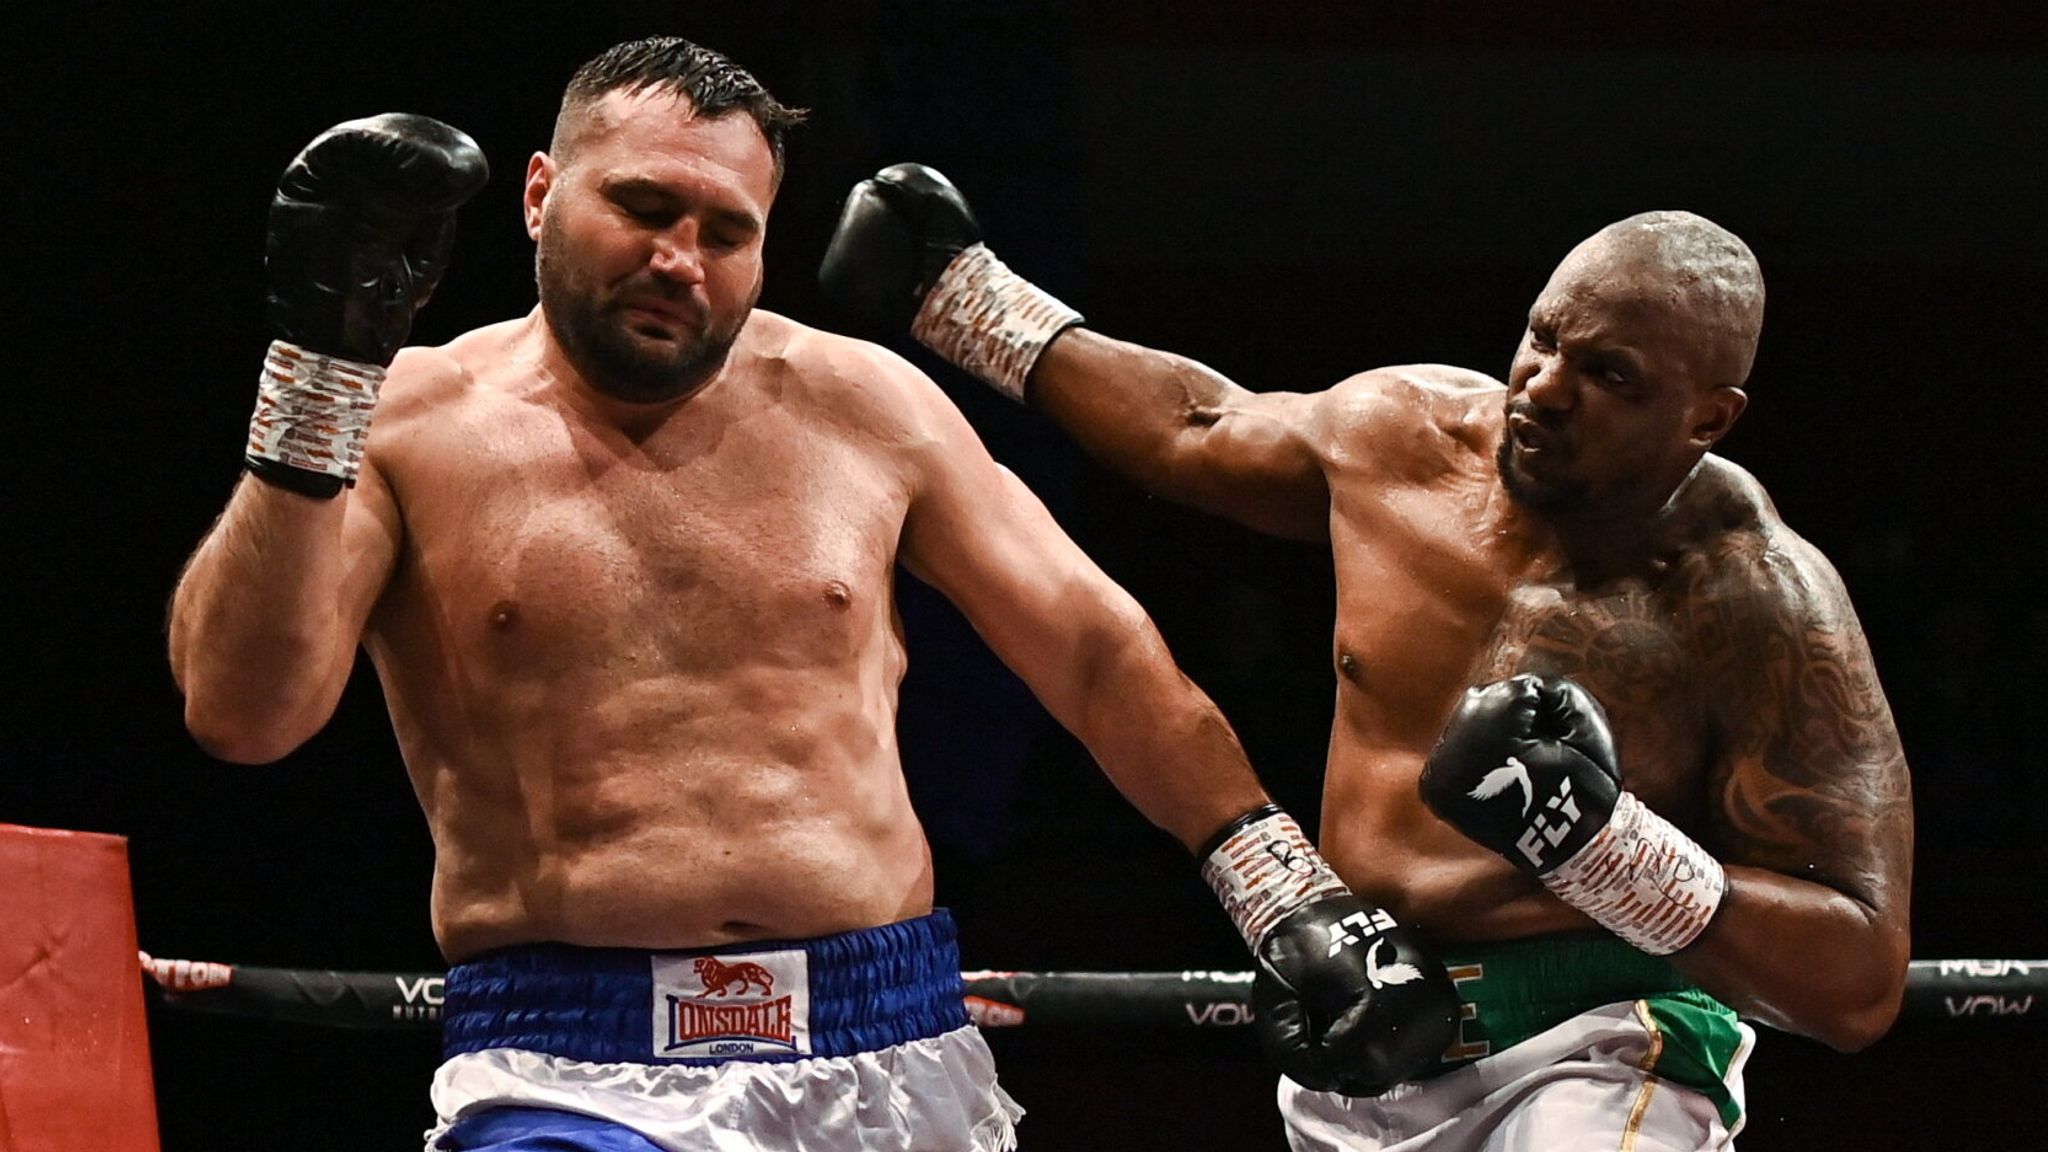 How Dillian Whyte's Knockout Win Over Christian Hammer Marks a Major Boxing Comeback Story